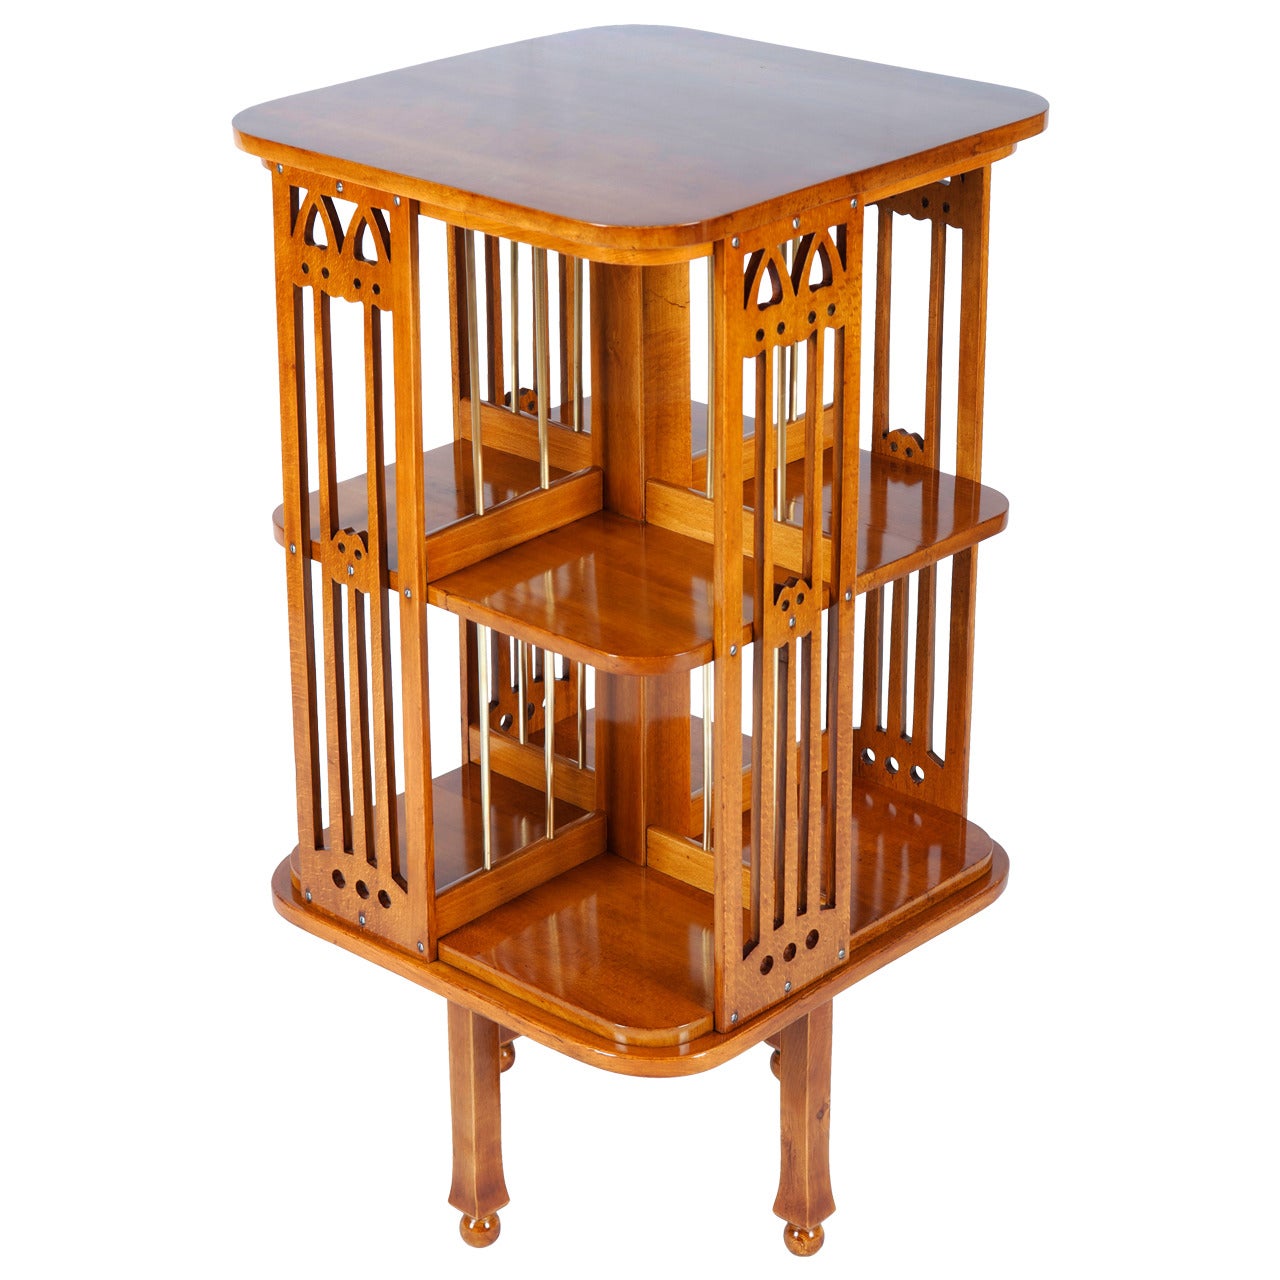 Very Rare Thonet Revolving Bookcase Attributed to Josef Hoffmann